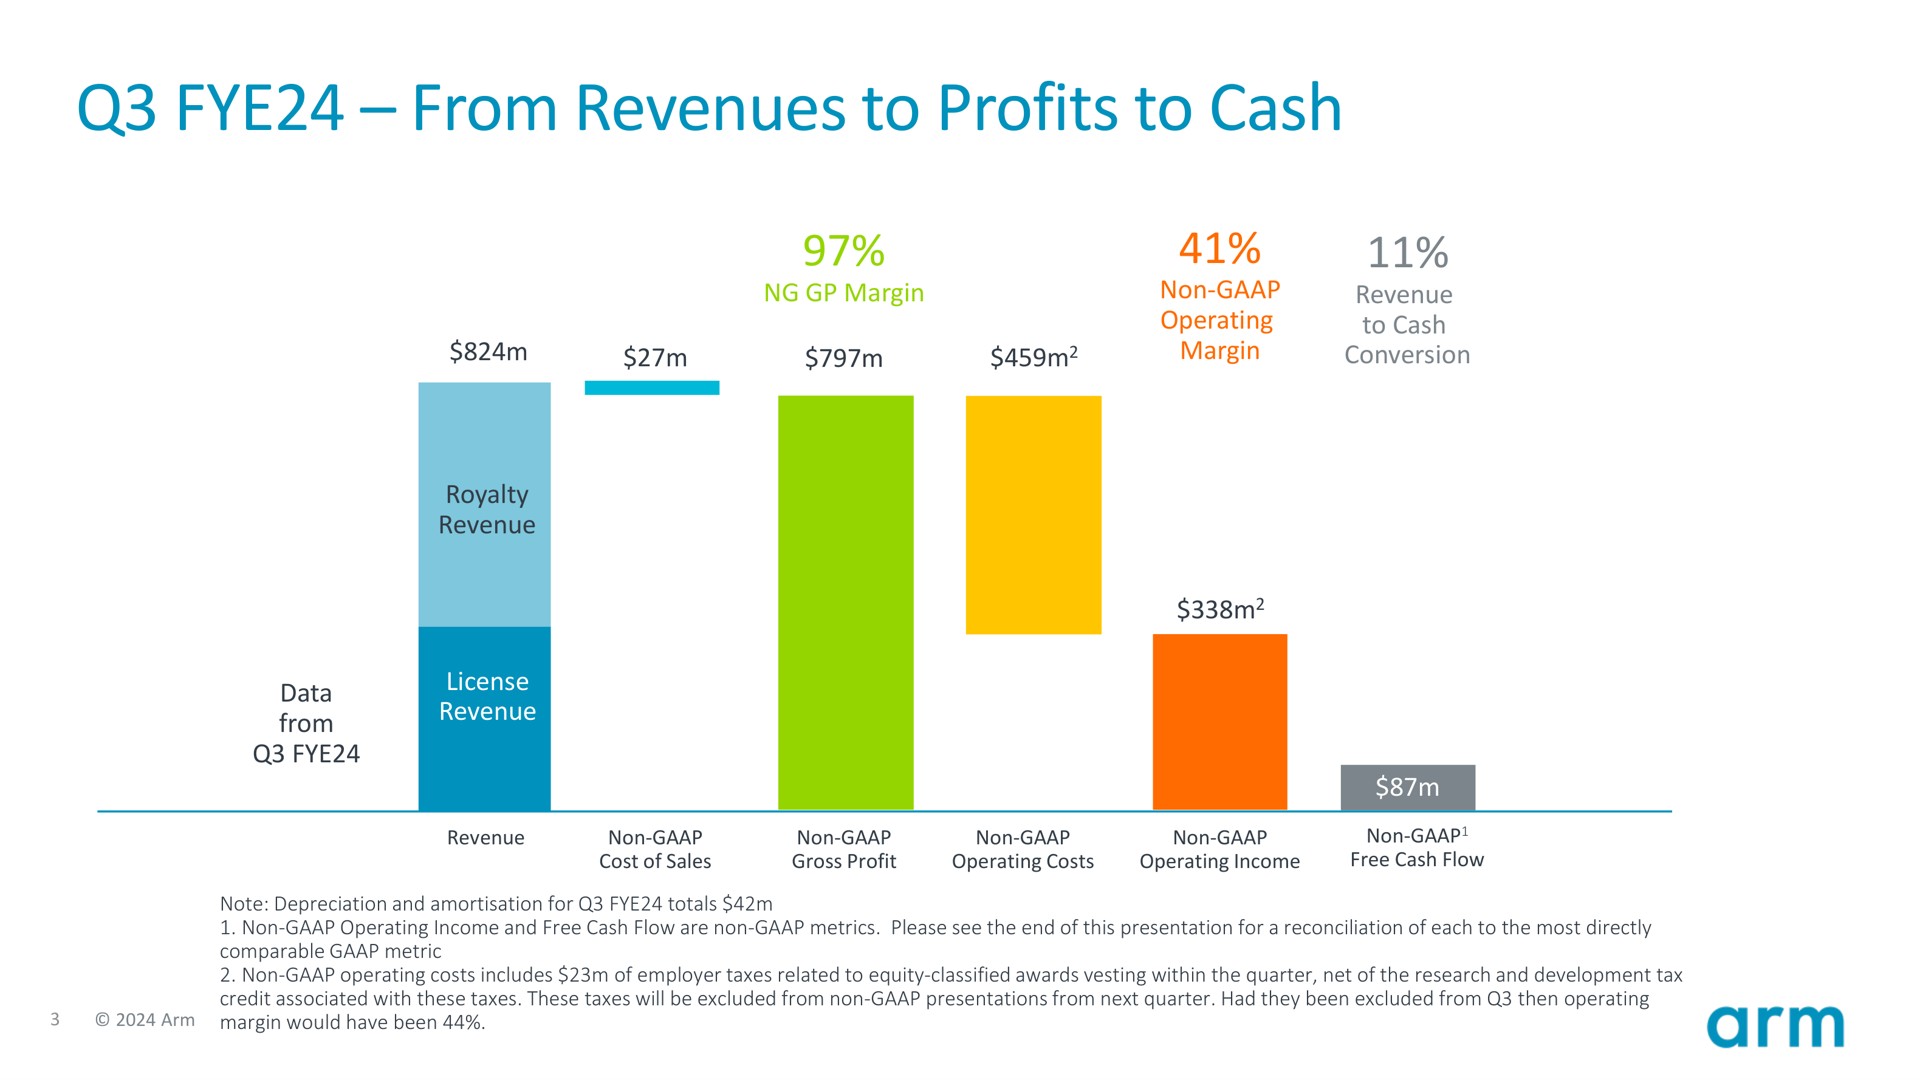 from revenues to profits to cash | SoftBank